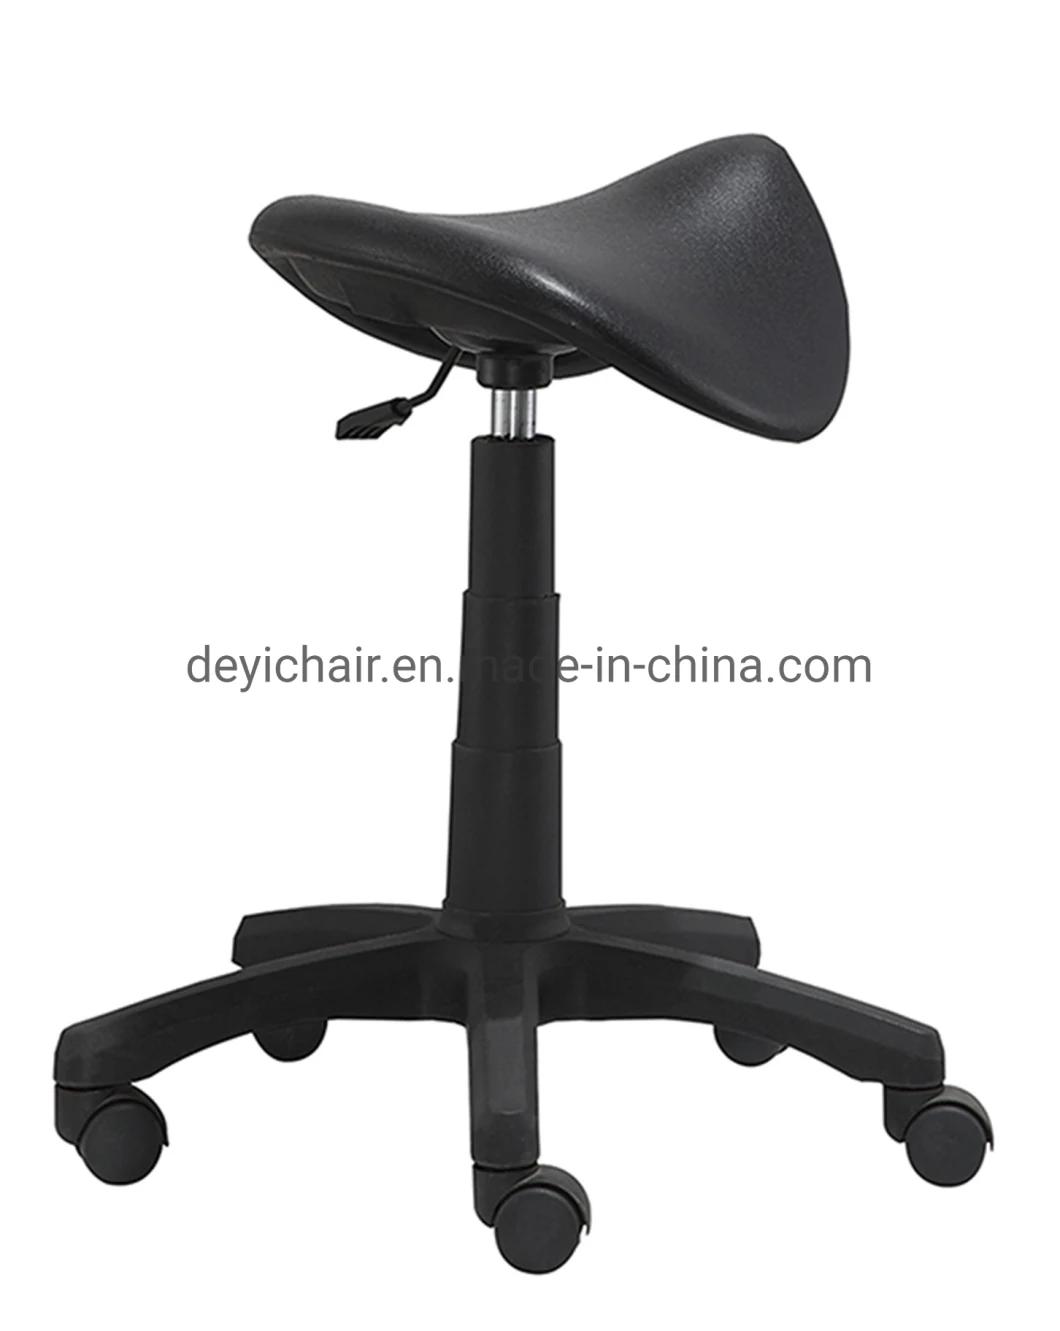 Simple Tilting Mechanism Class Four Gaslift Nylon Base Mould PU Seat Cushion Saddle Industrial Chair